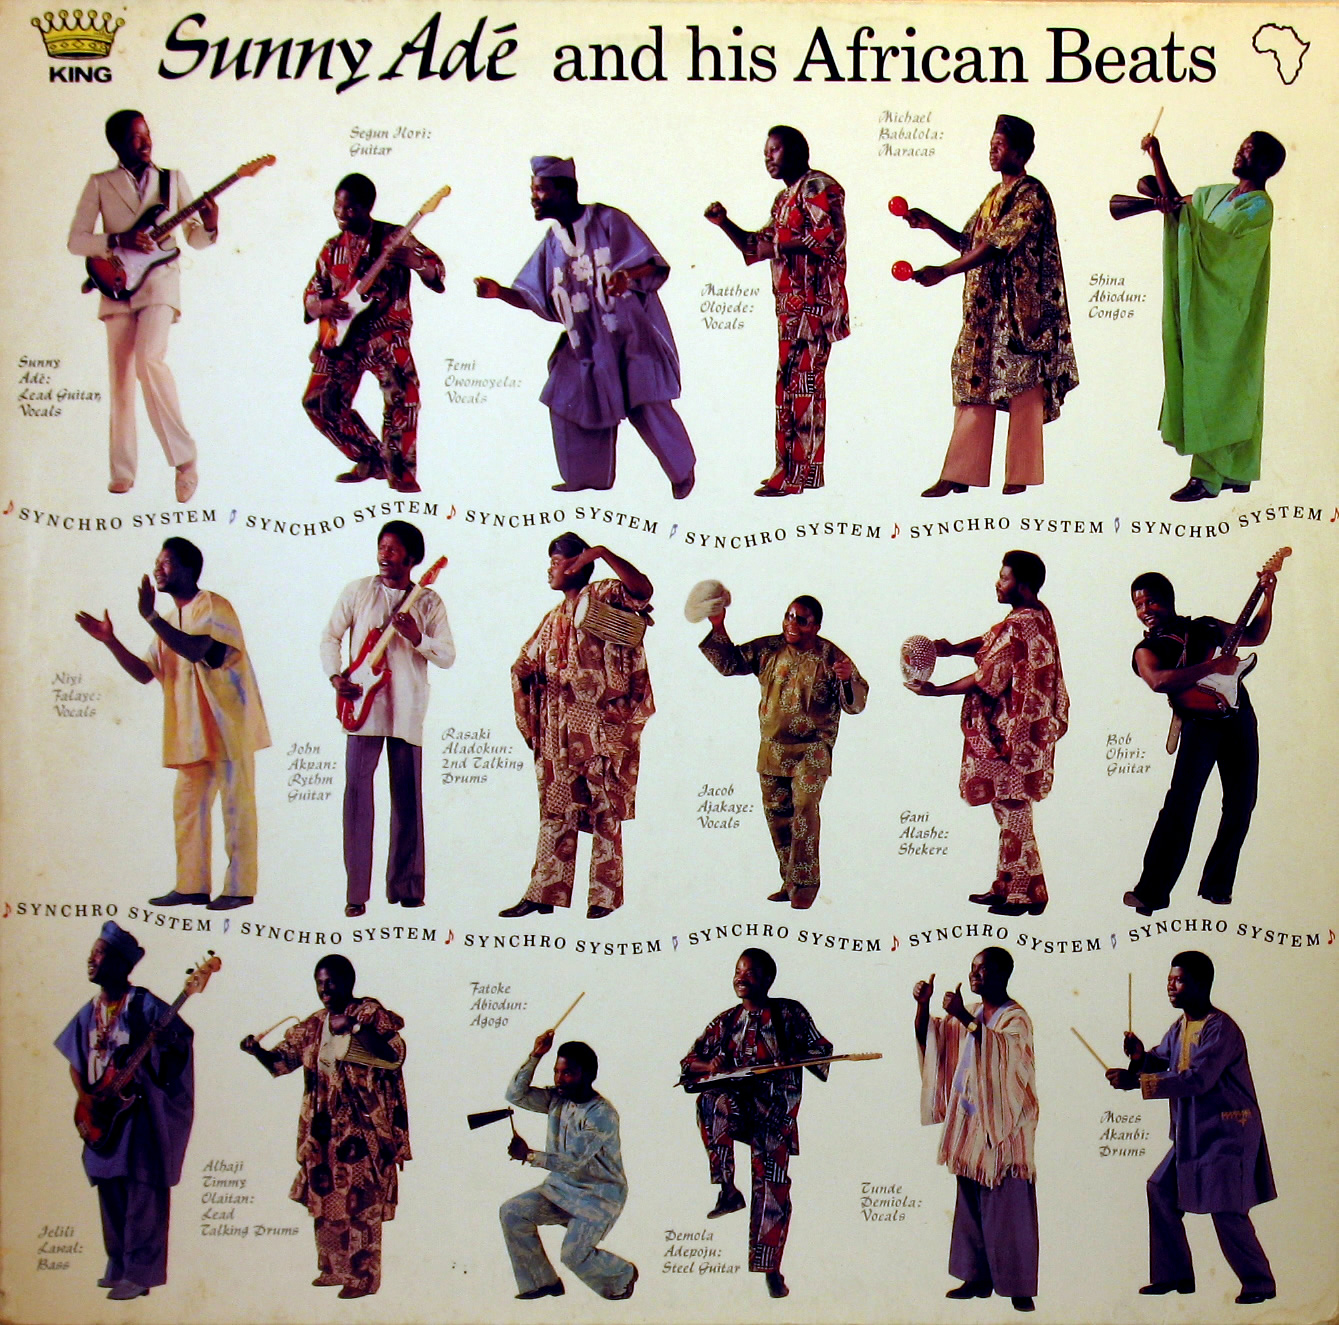 King Sunny Adé and his African Beats – Synchro System, Island Records 1983 King-Sunny-Ad%C3%A9-front